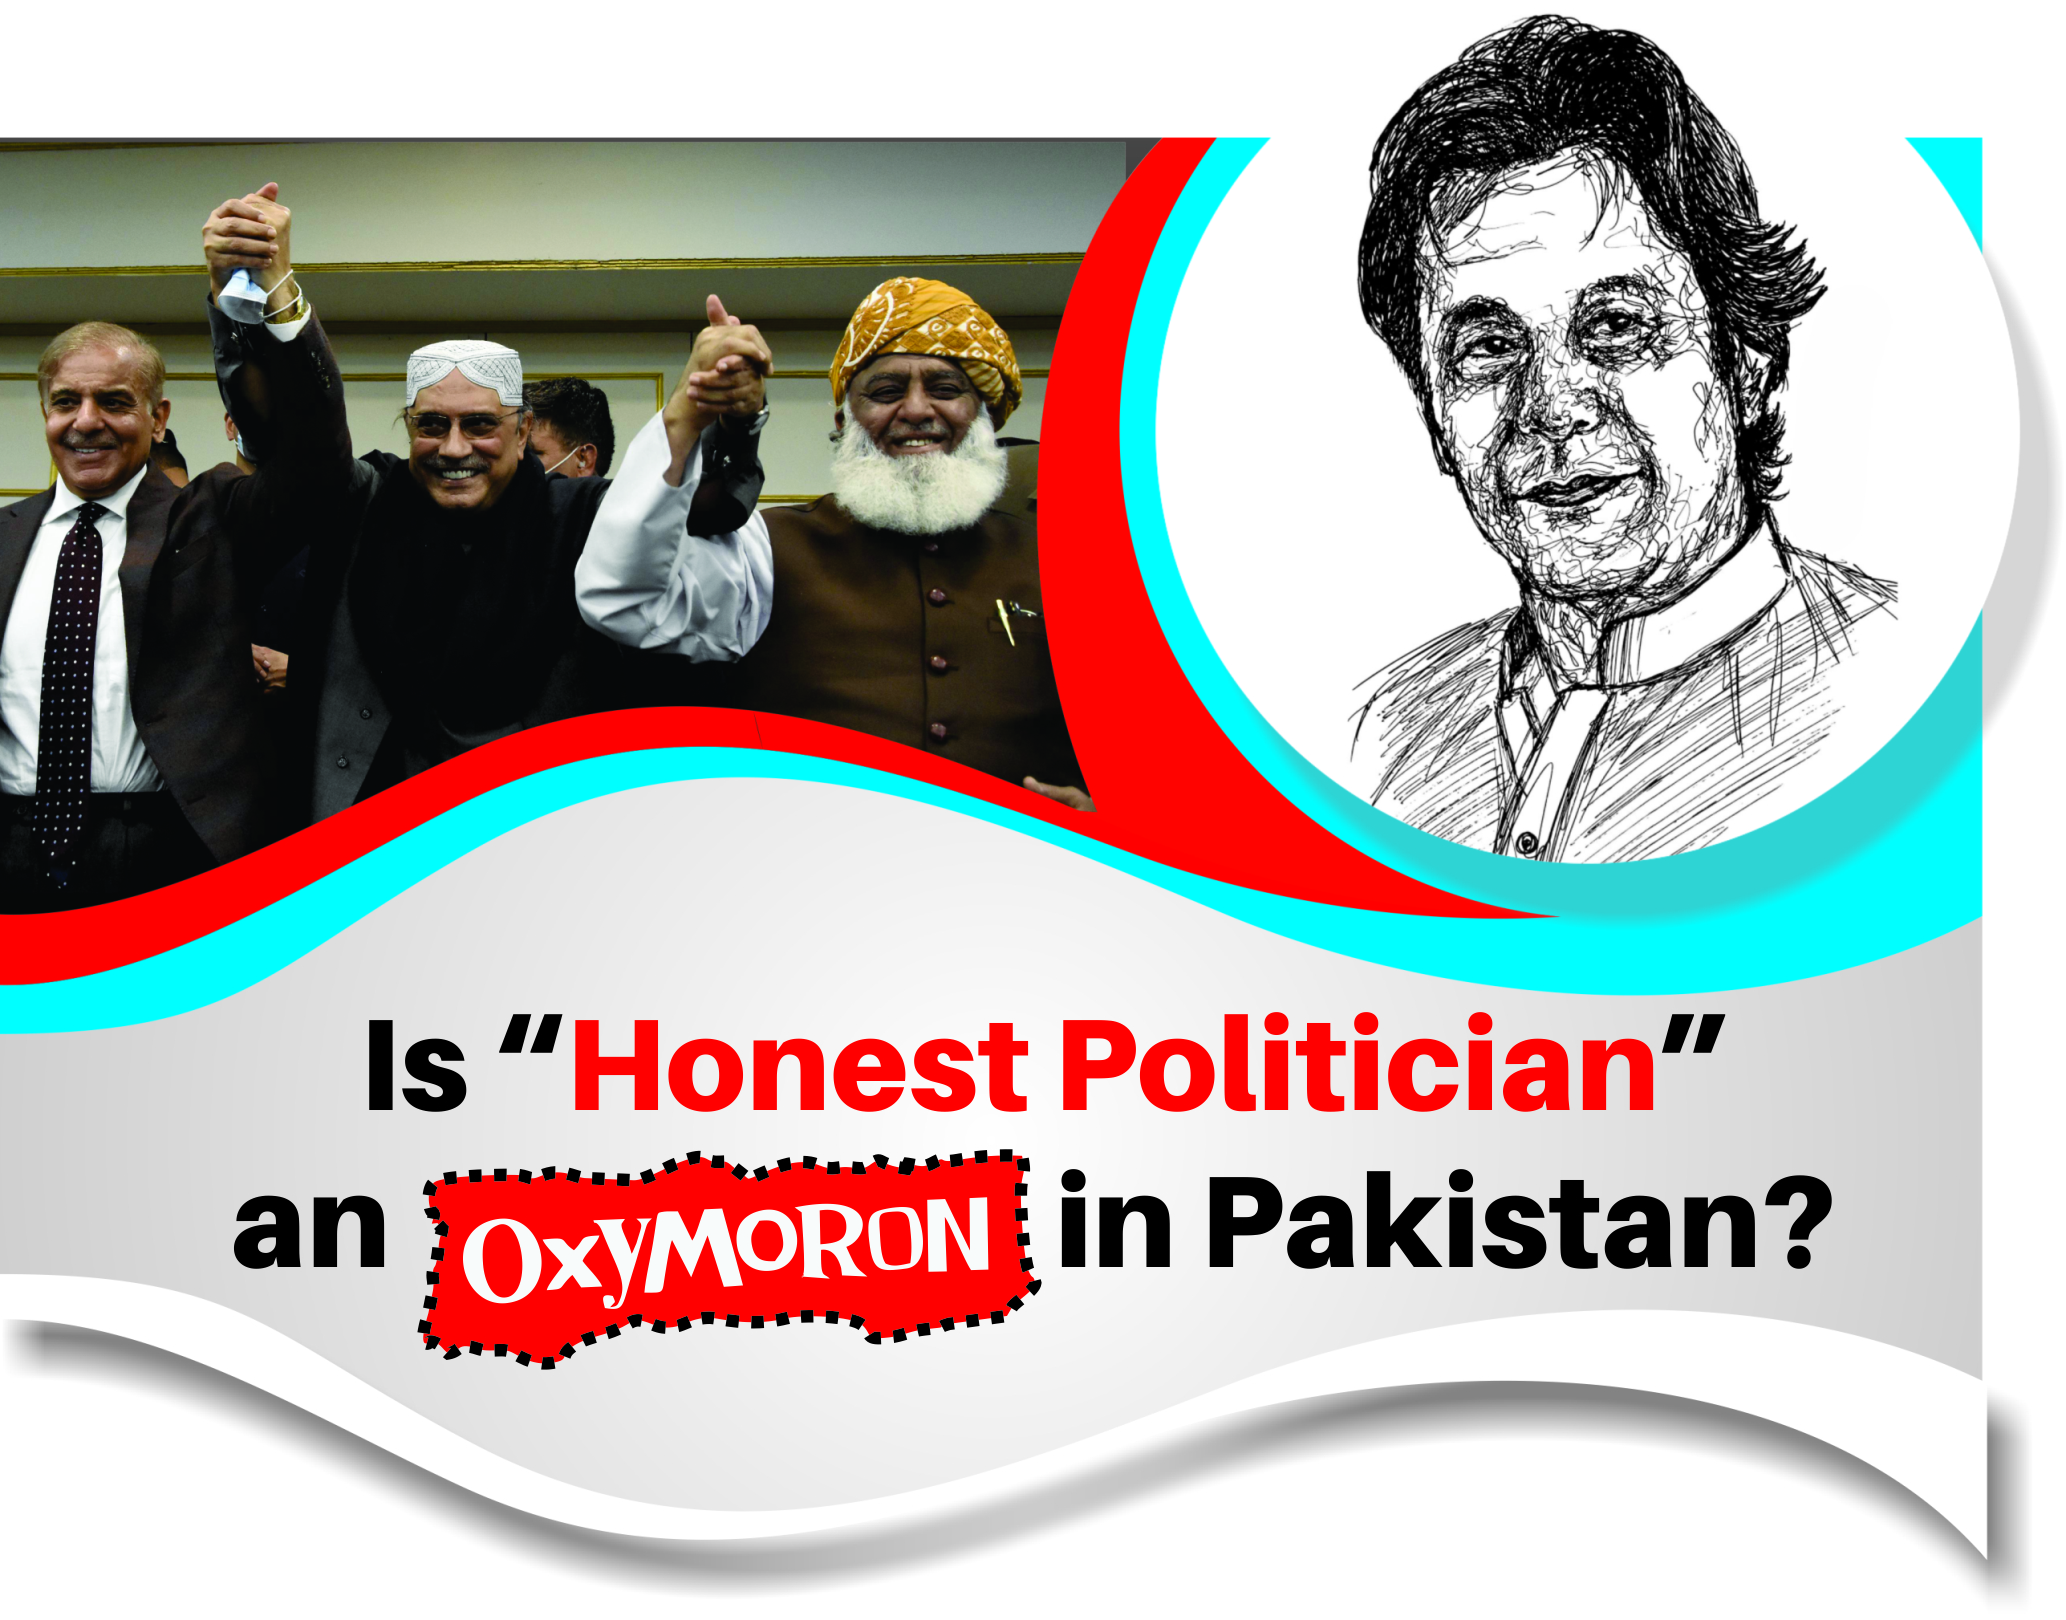 You are currently viewing Is “Honest Politician” Oxymoron an in Pakistan?